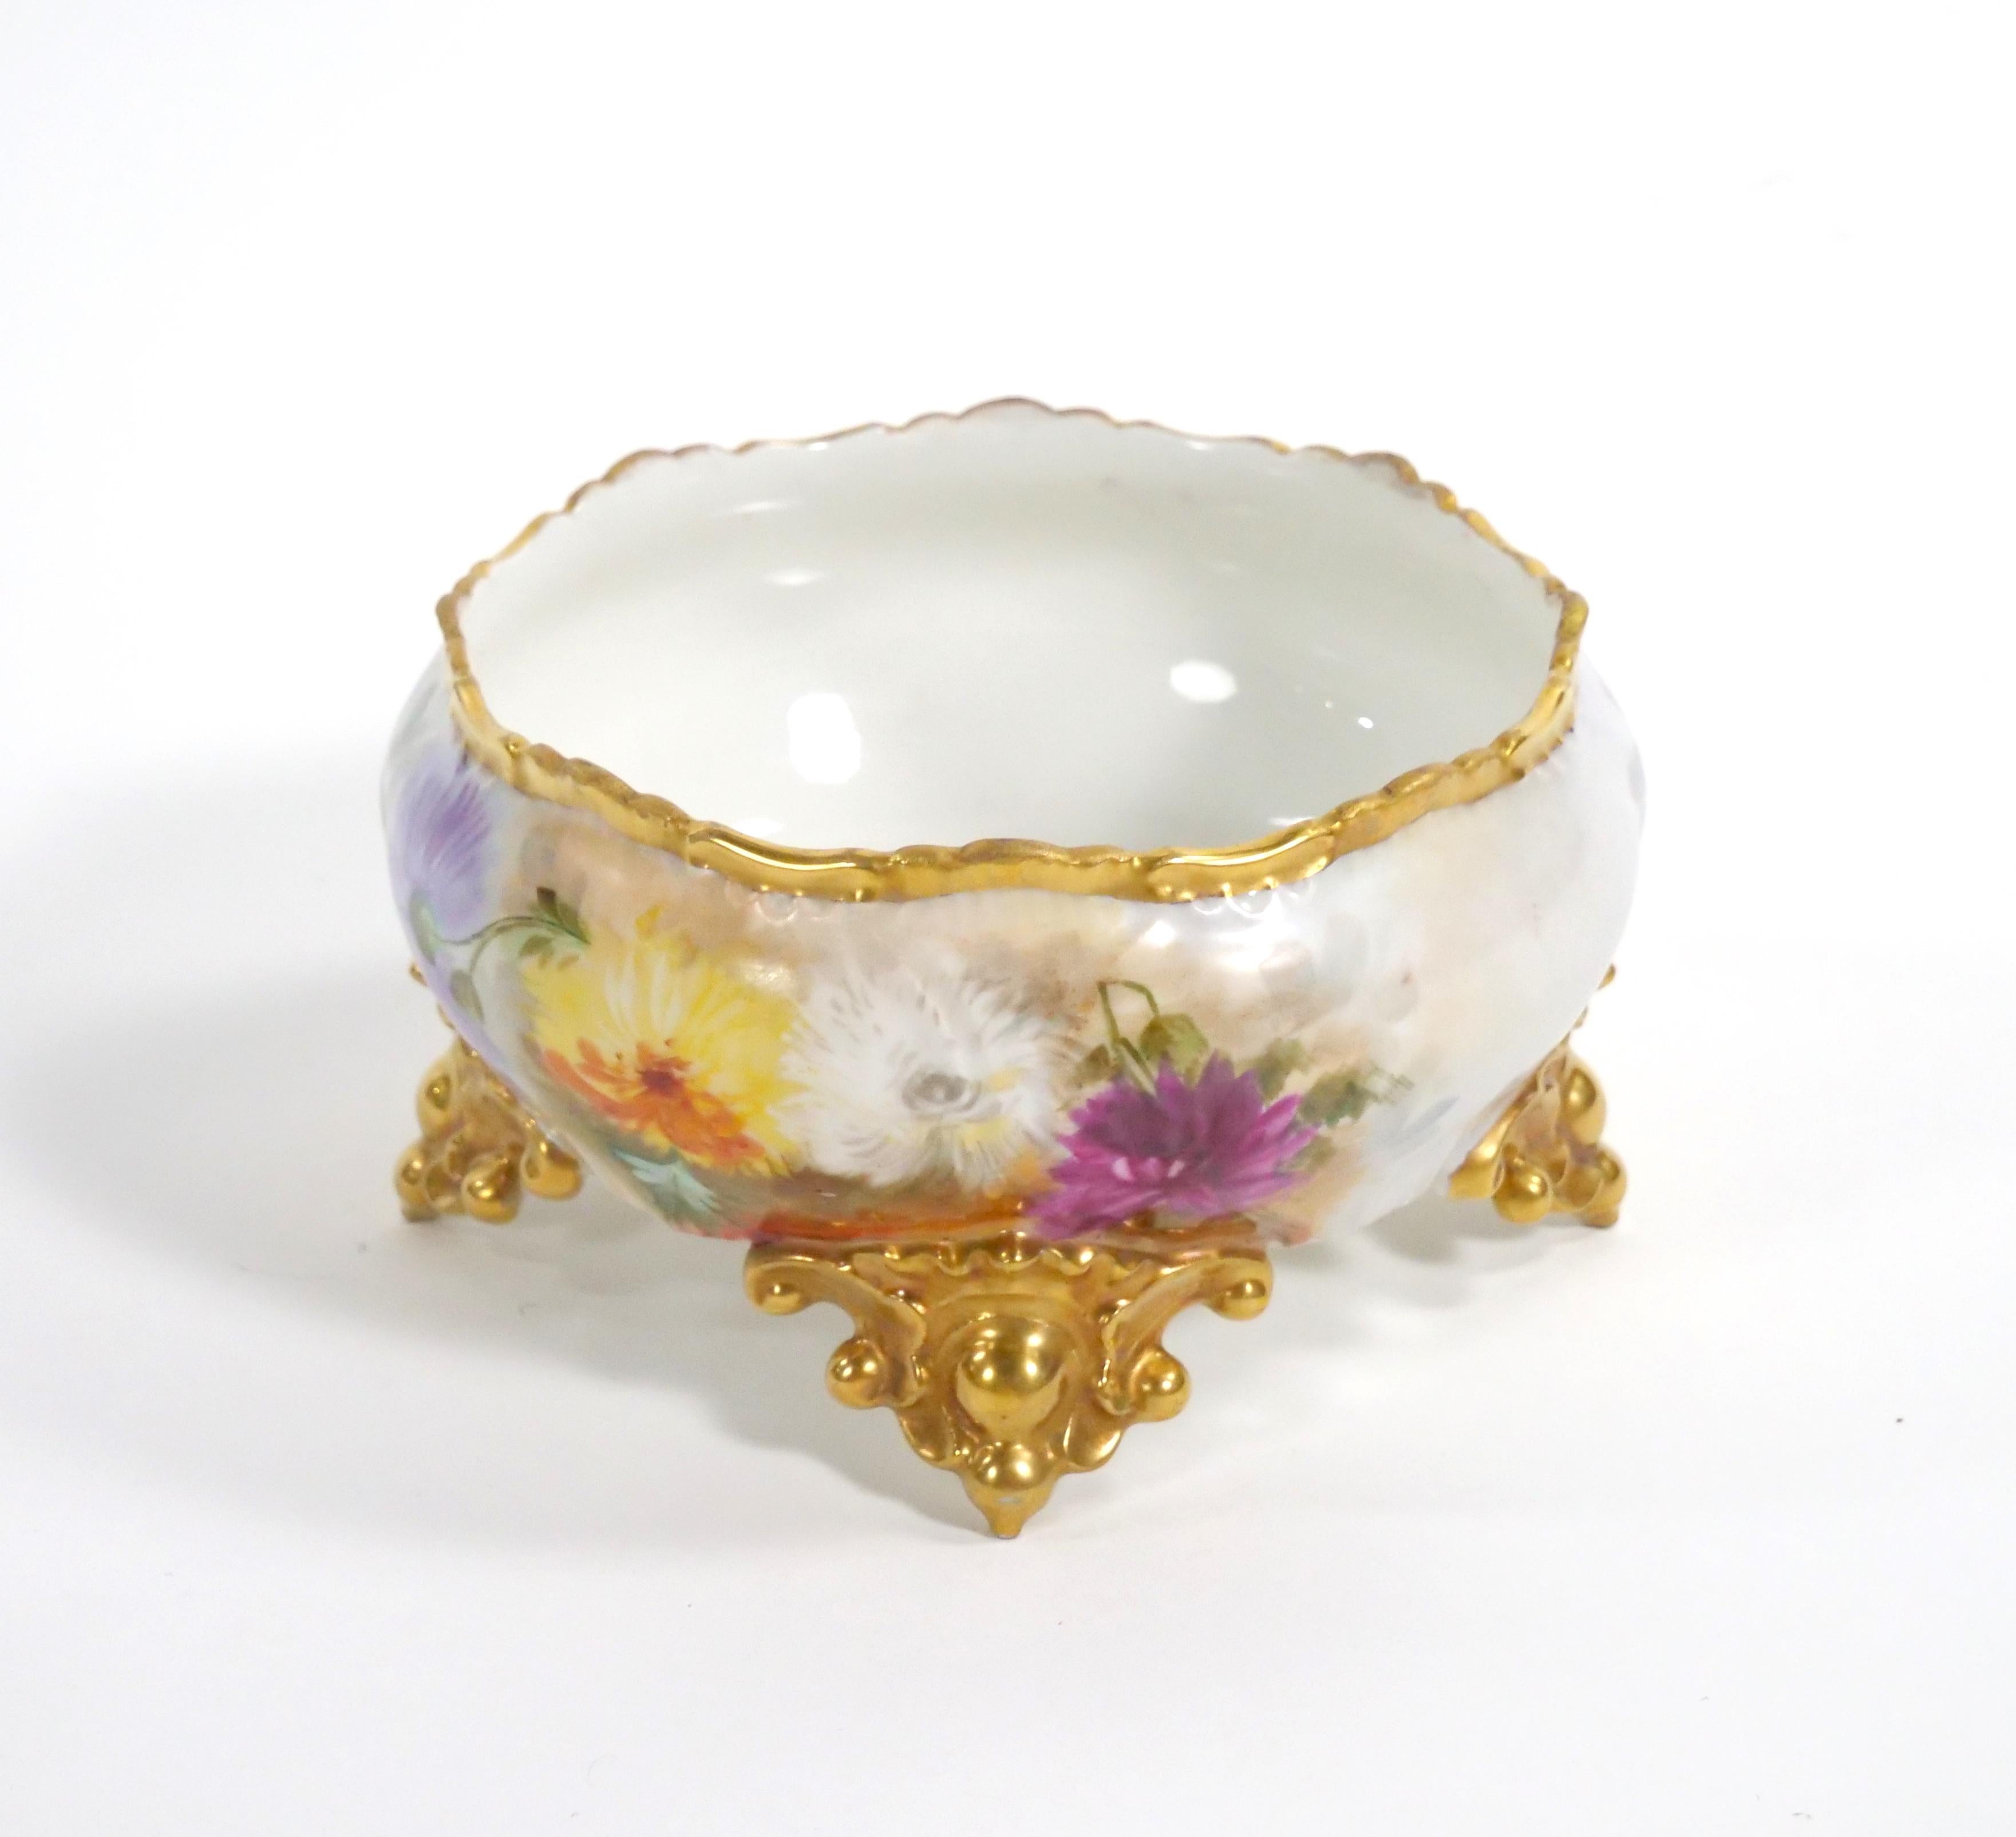 Enhance your dining or decor with this beautifully hand-painted and gilt gold-decorated French Limoges Porcelain Footed Tableware Centerpiece Bowl. This exquisite piece is a true work of art that radiates elegance and charm. The centerpiece is